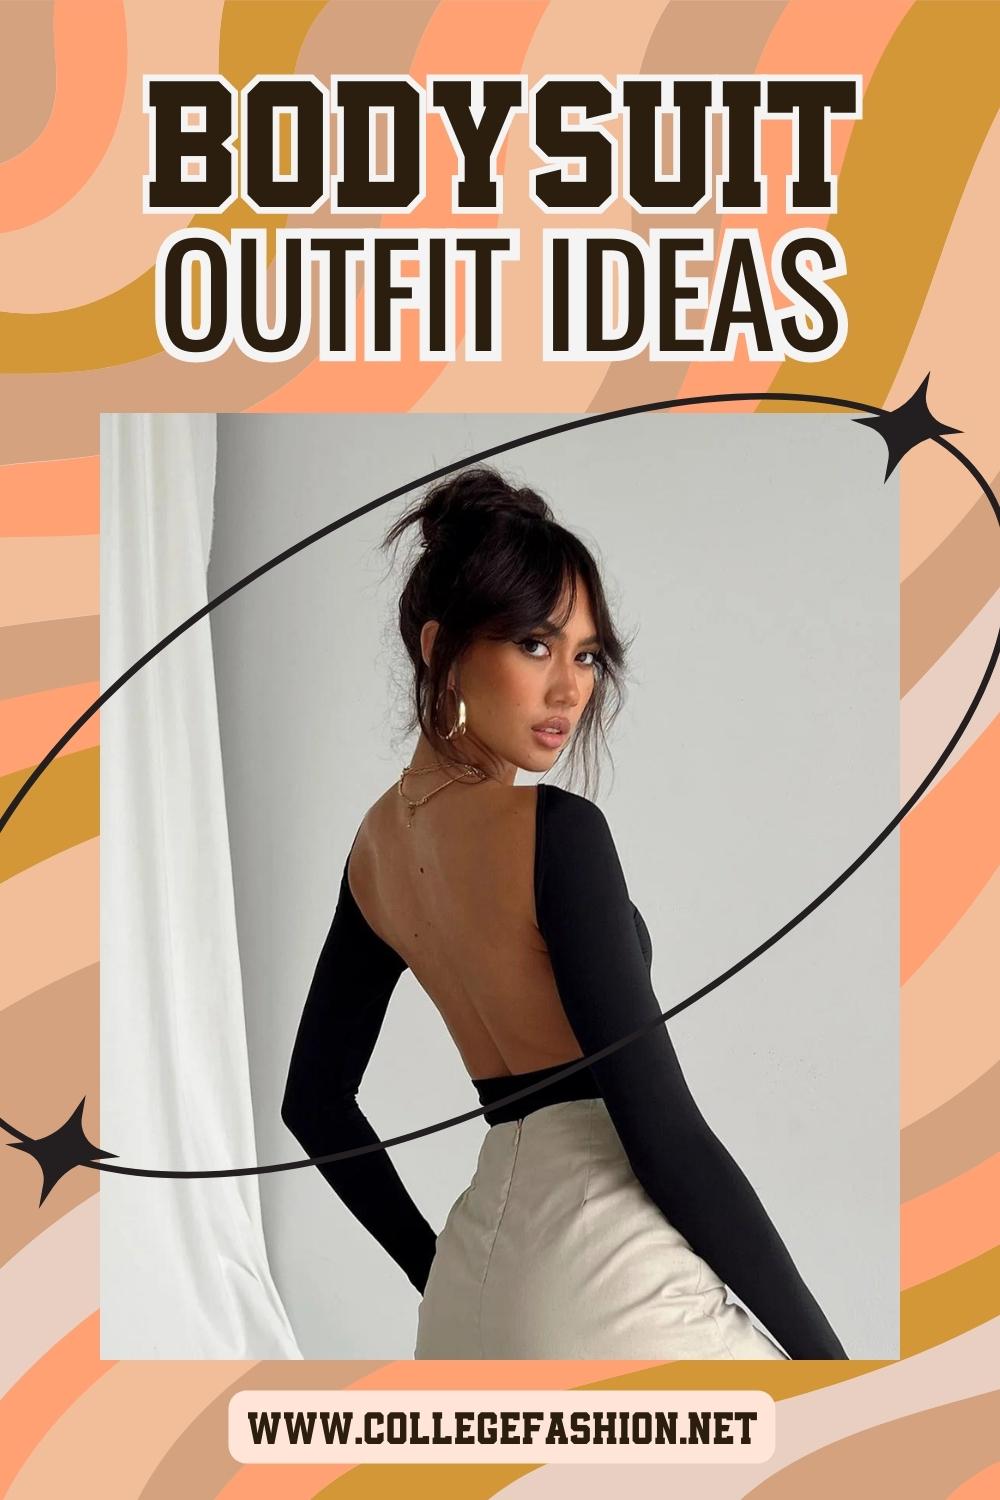 Bodysuit Outfits 101: How to Wear Bodysuits for Any Occasion